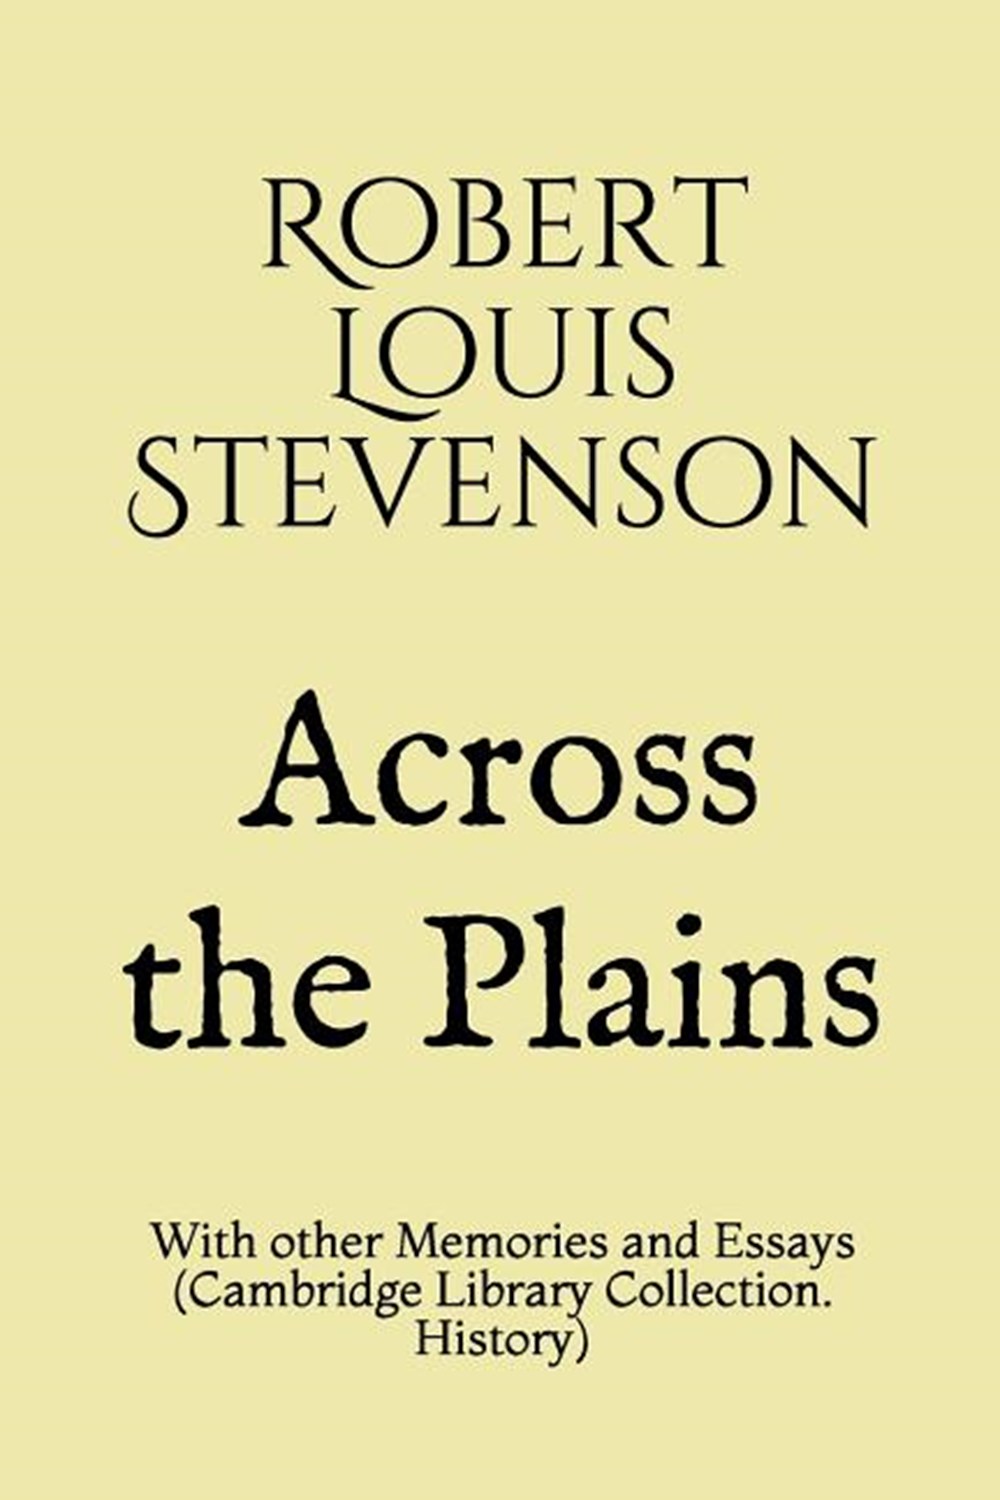 Across the Plains: With other Memories and Essays (Cambridge Library Collection. History)